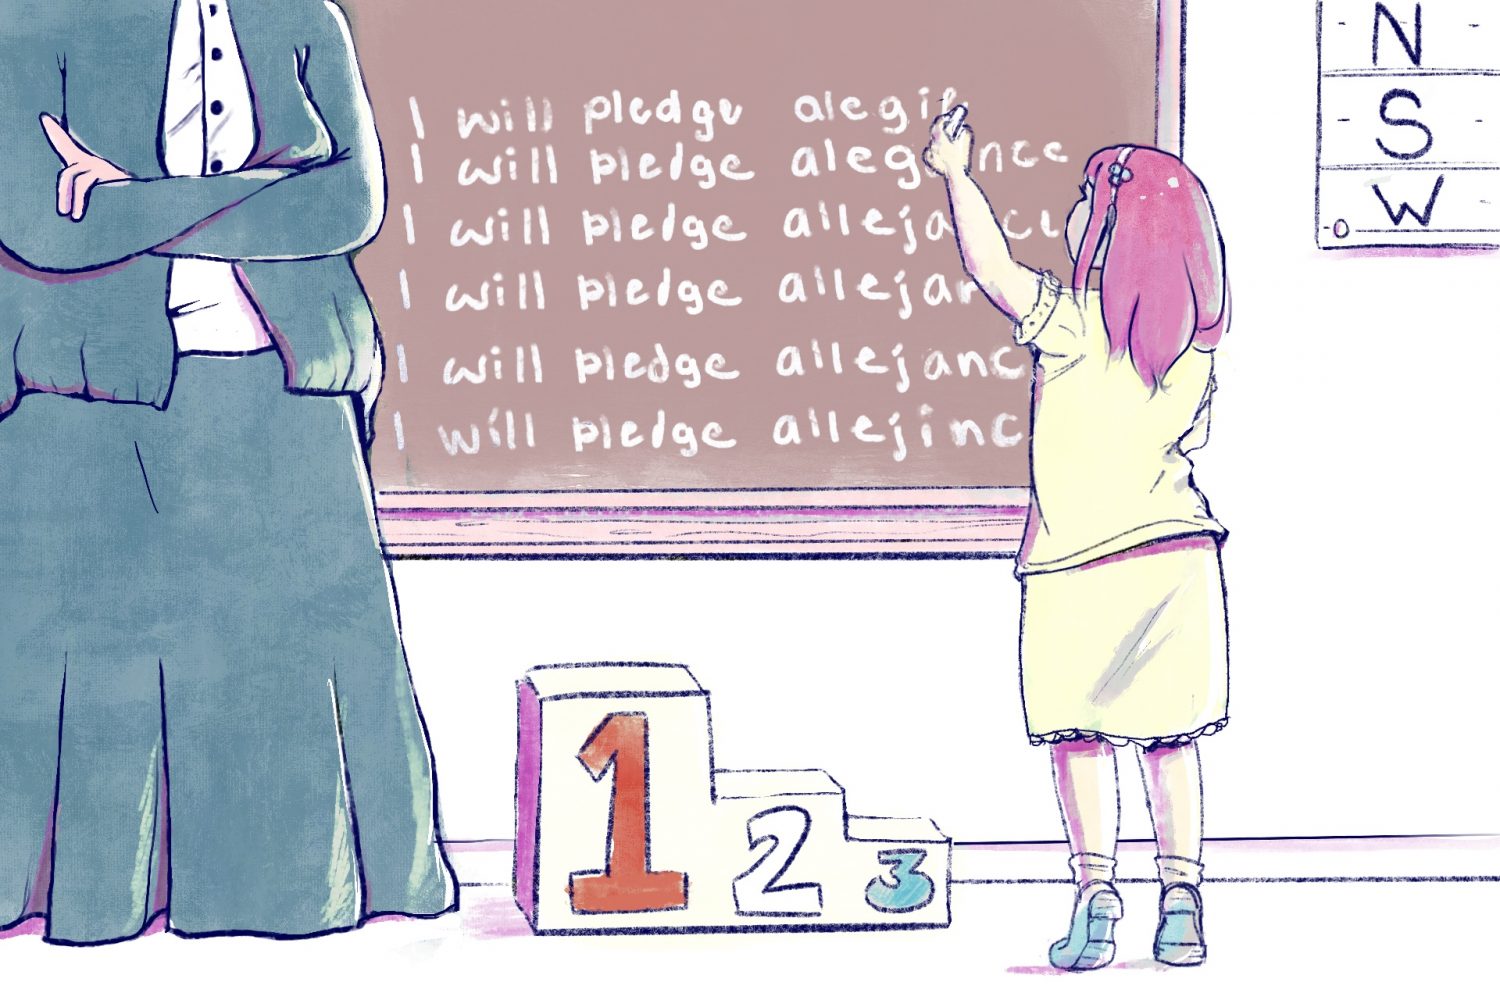 “Unpatriotic” – A small child in yellow stands on her toes to repeat writing these lines on a chalkboard: “I will pledge allegiance.” Allegiance is misspelled in all six lines written. There is a stool to her left shaped and numbered like a tri-level ranking podium. The teacher on the far left has her arms crossed and her face out of frame. She wears blue and white. Everything else, besides the child’s outfit, is in shades of red and pink.